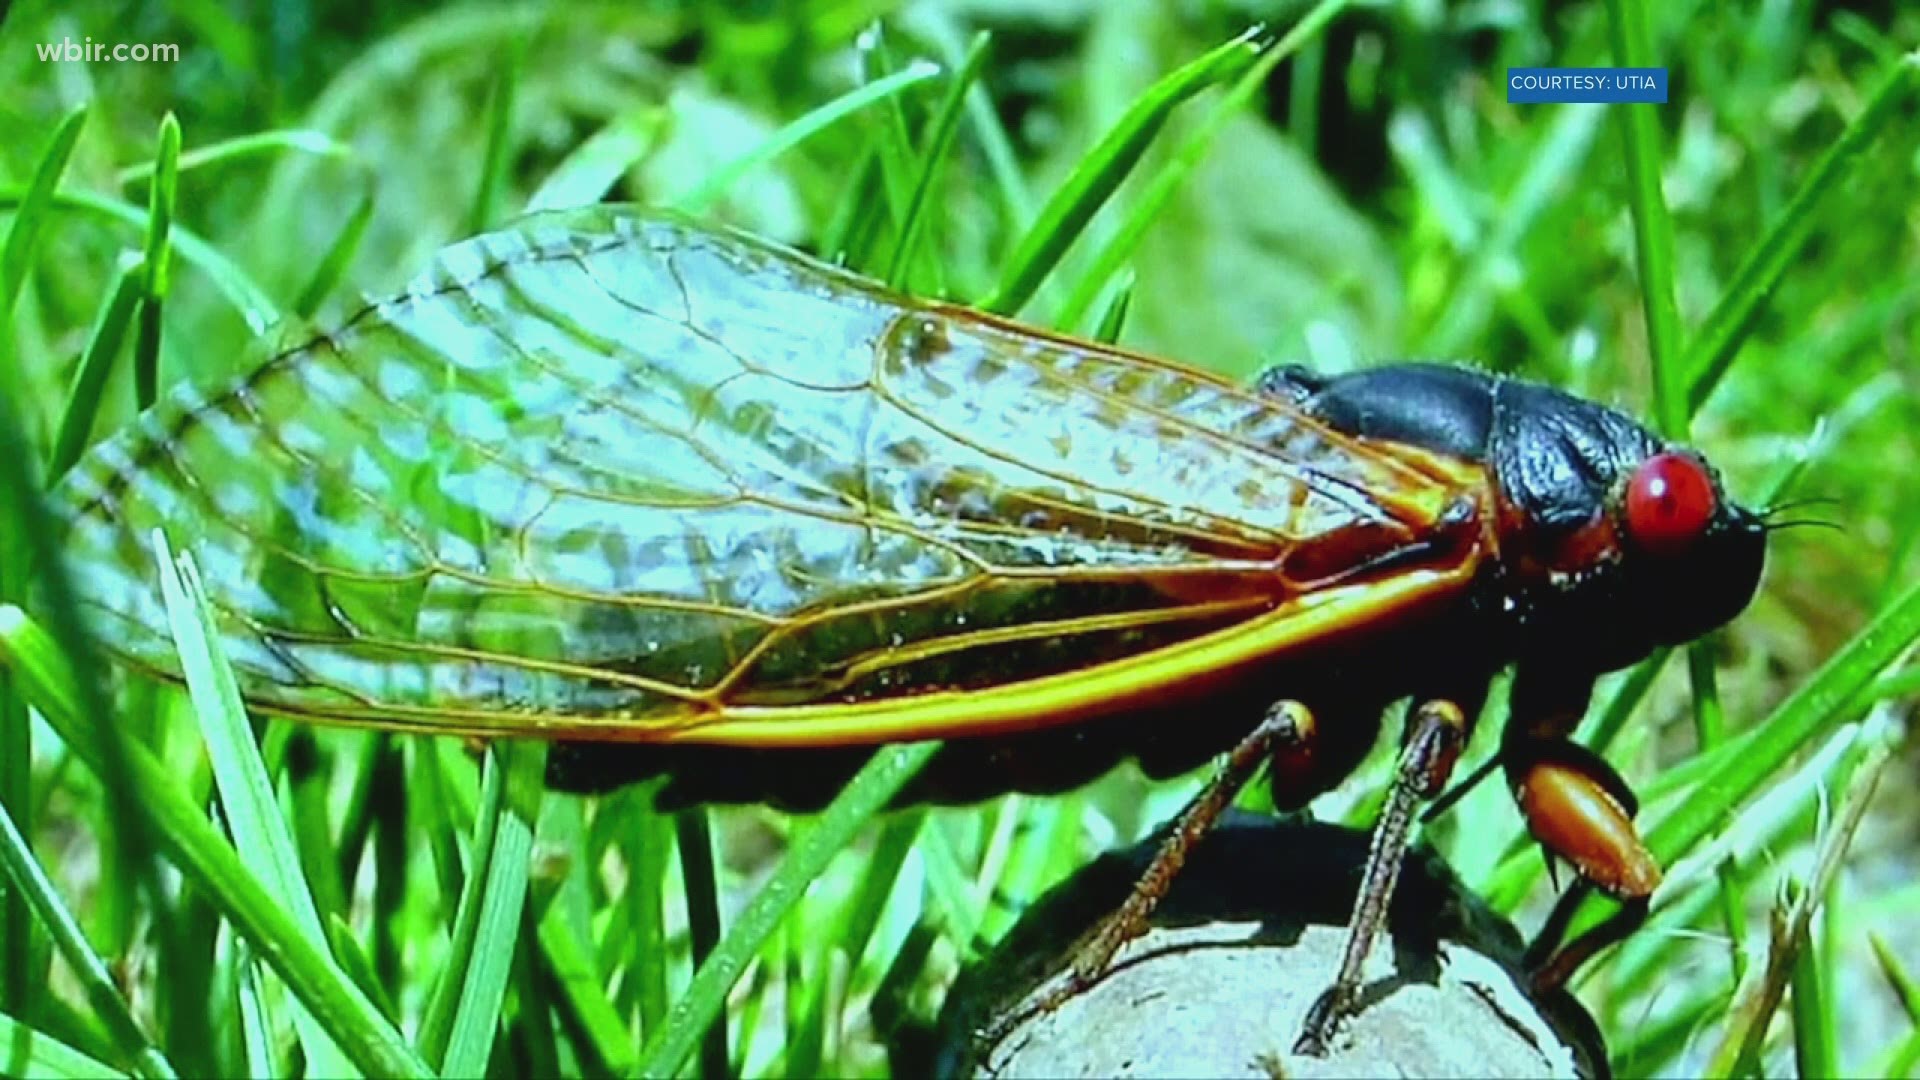 Look for the 17-year cicada to emerge from the ground as temperatures start warming. Snakes also will start turning up.